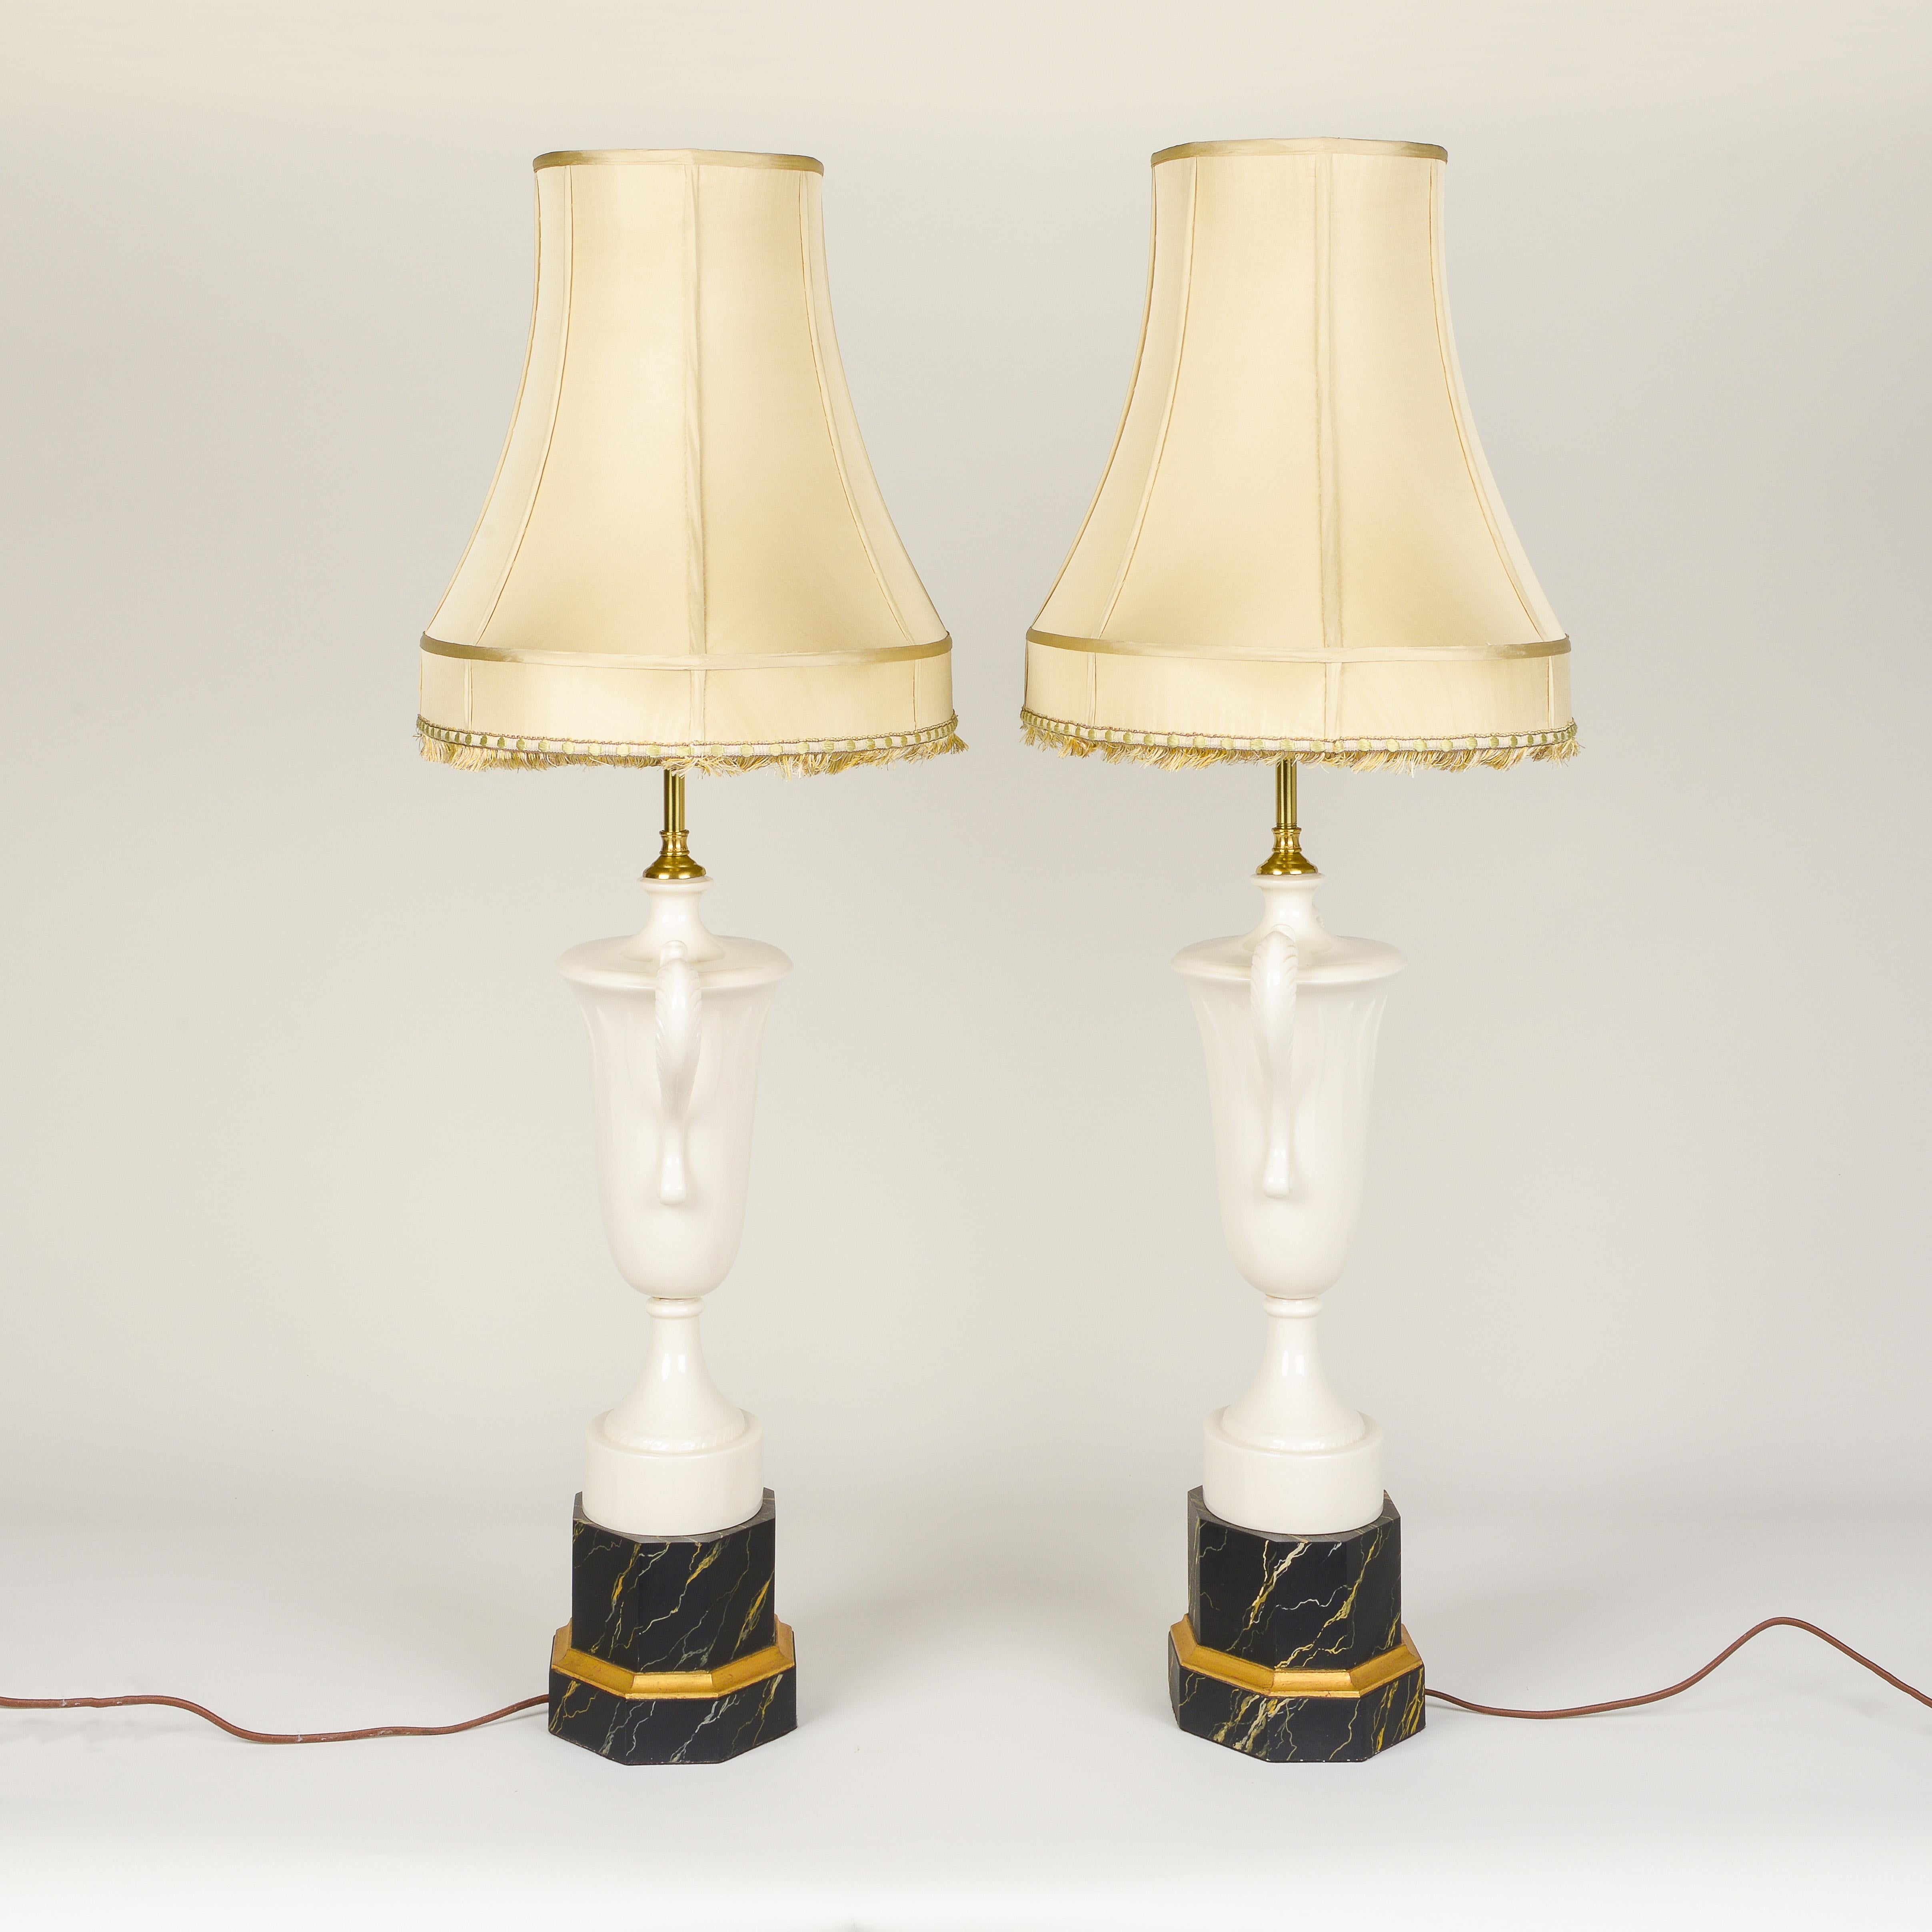 Each in the shape of a Grecian urn with two outward scrolling handles and fitted with two bulb sockets; mounted on black faux marble-painted bases with gilt banding. With pale gold silk shades.